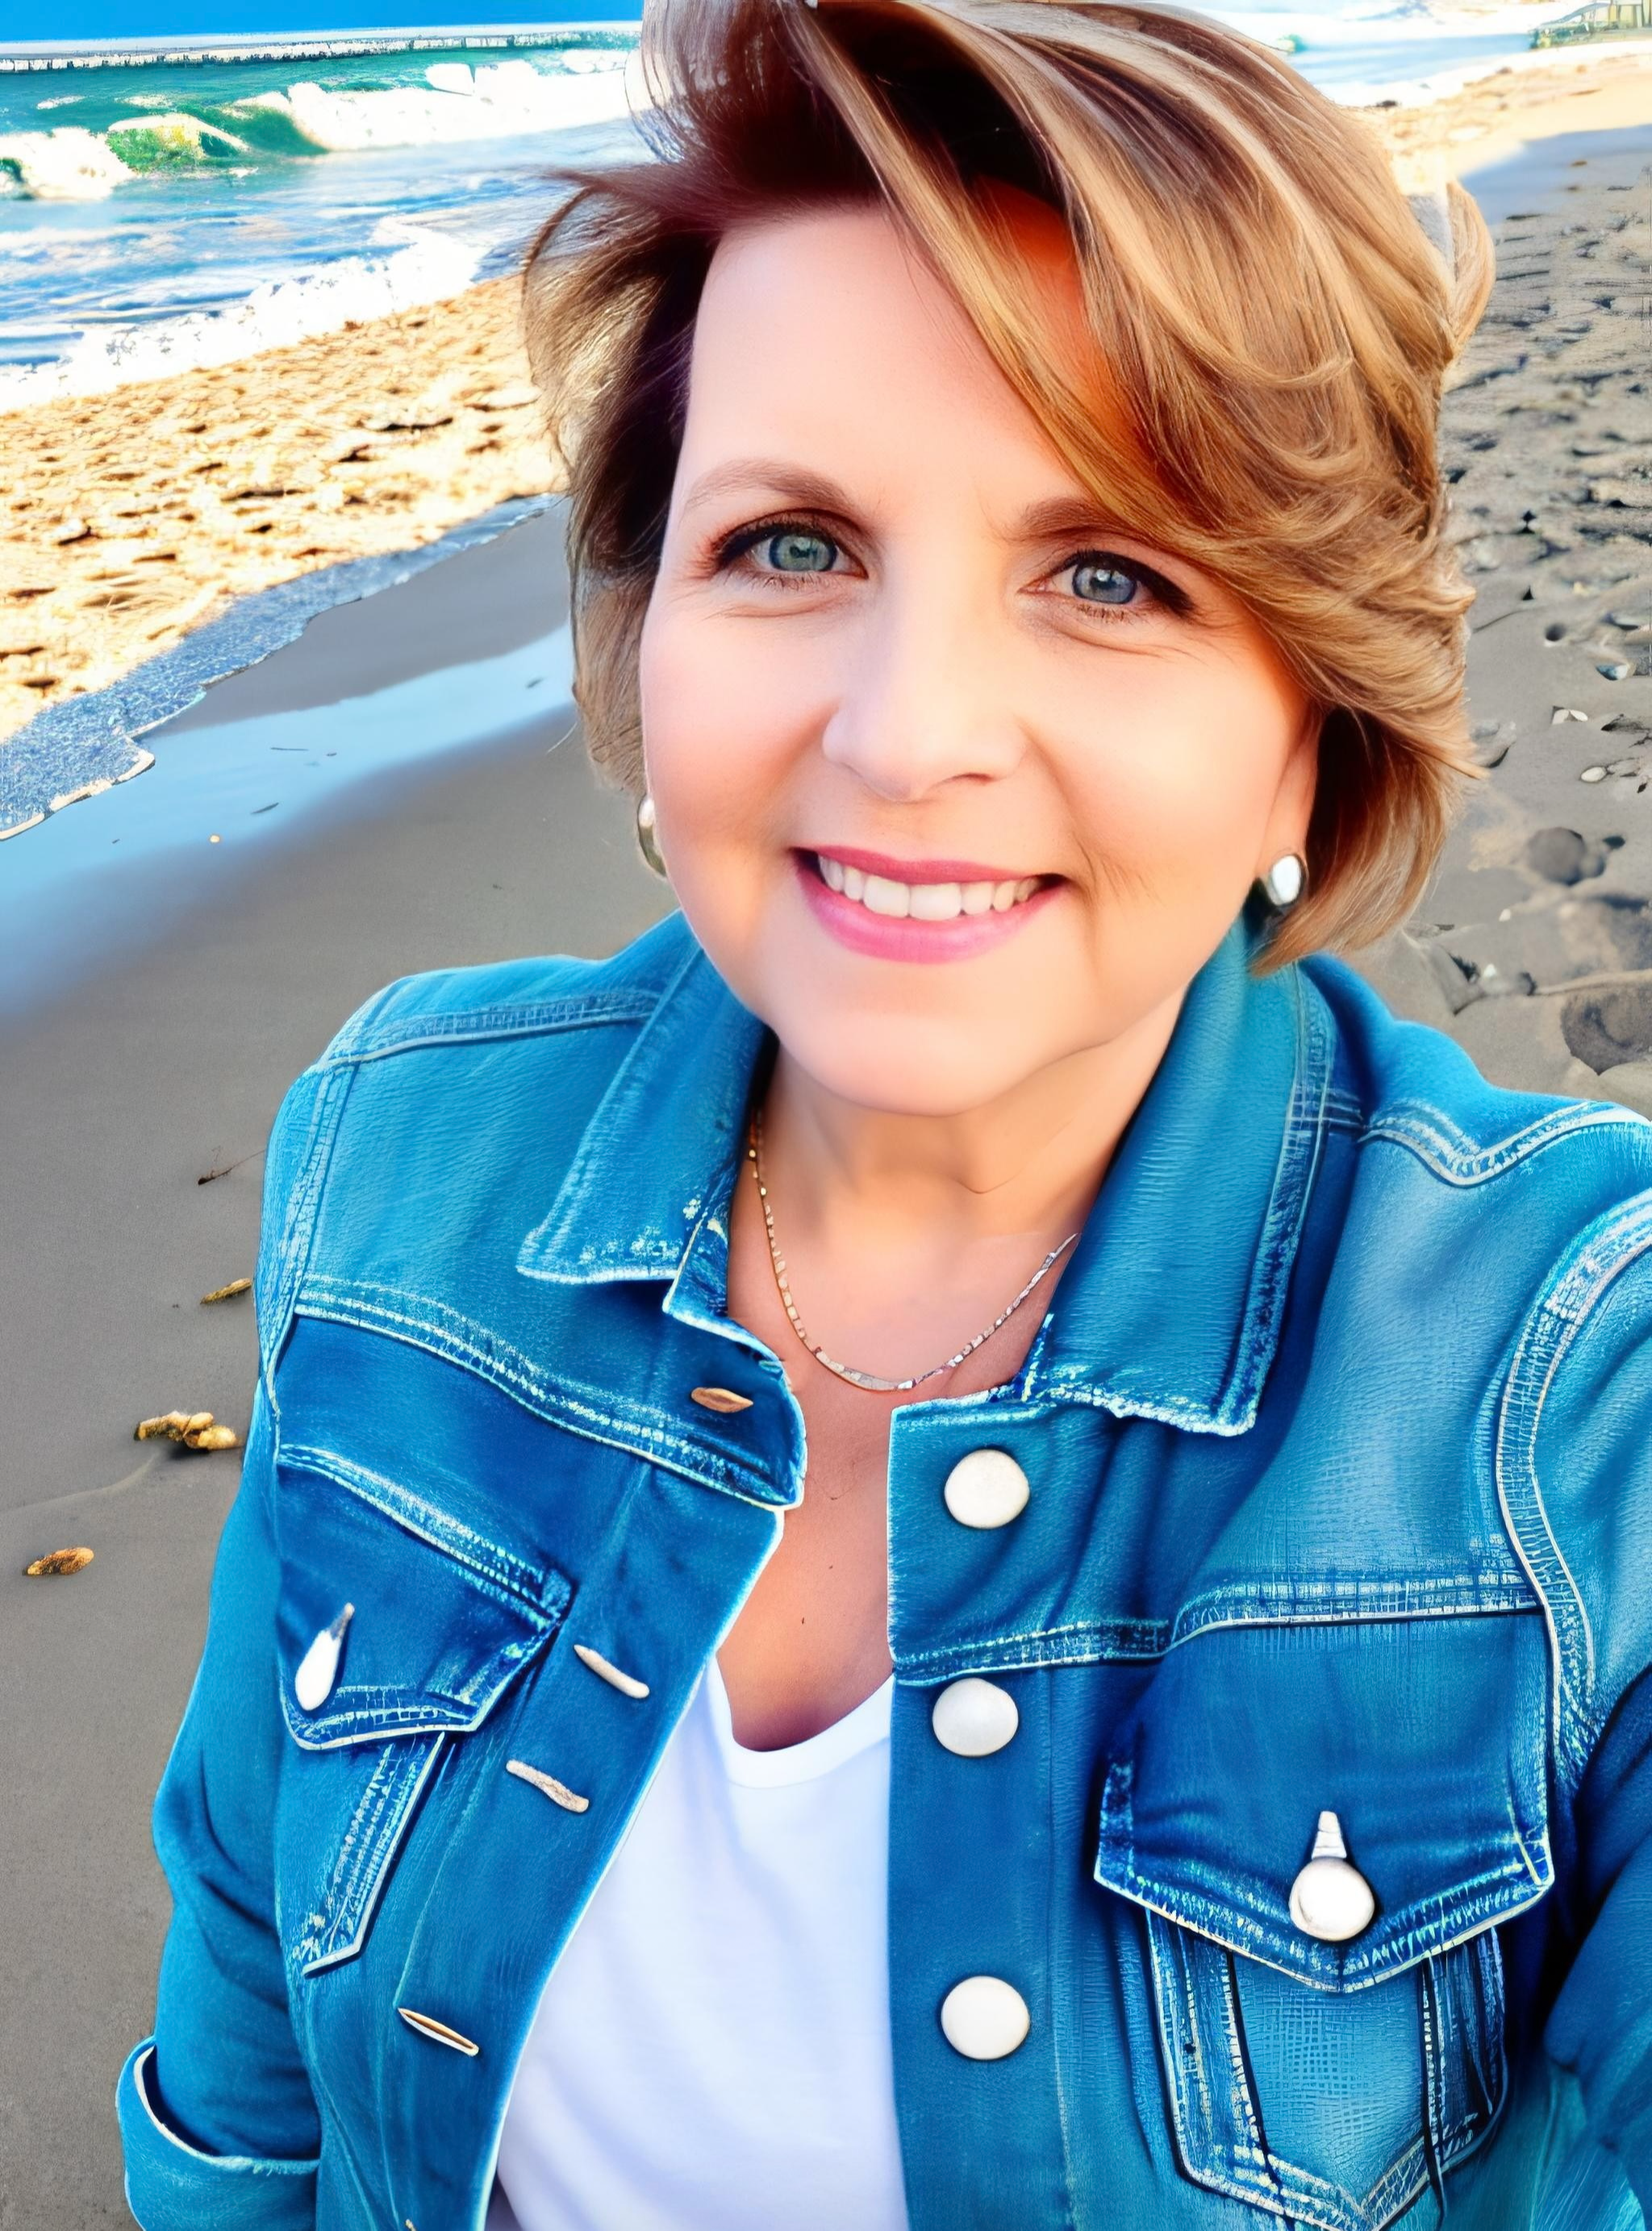 Smiling white woman with short brown hair, in a denim jacket